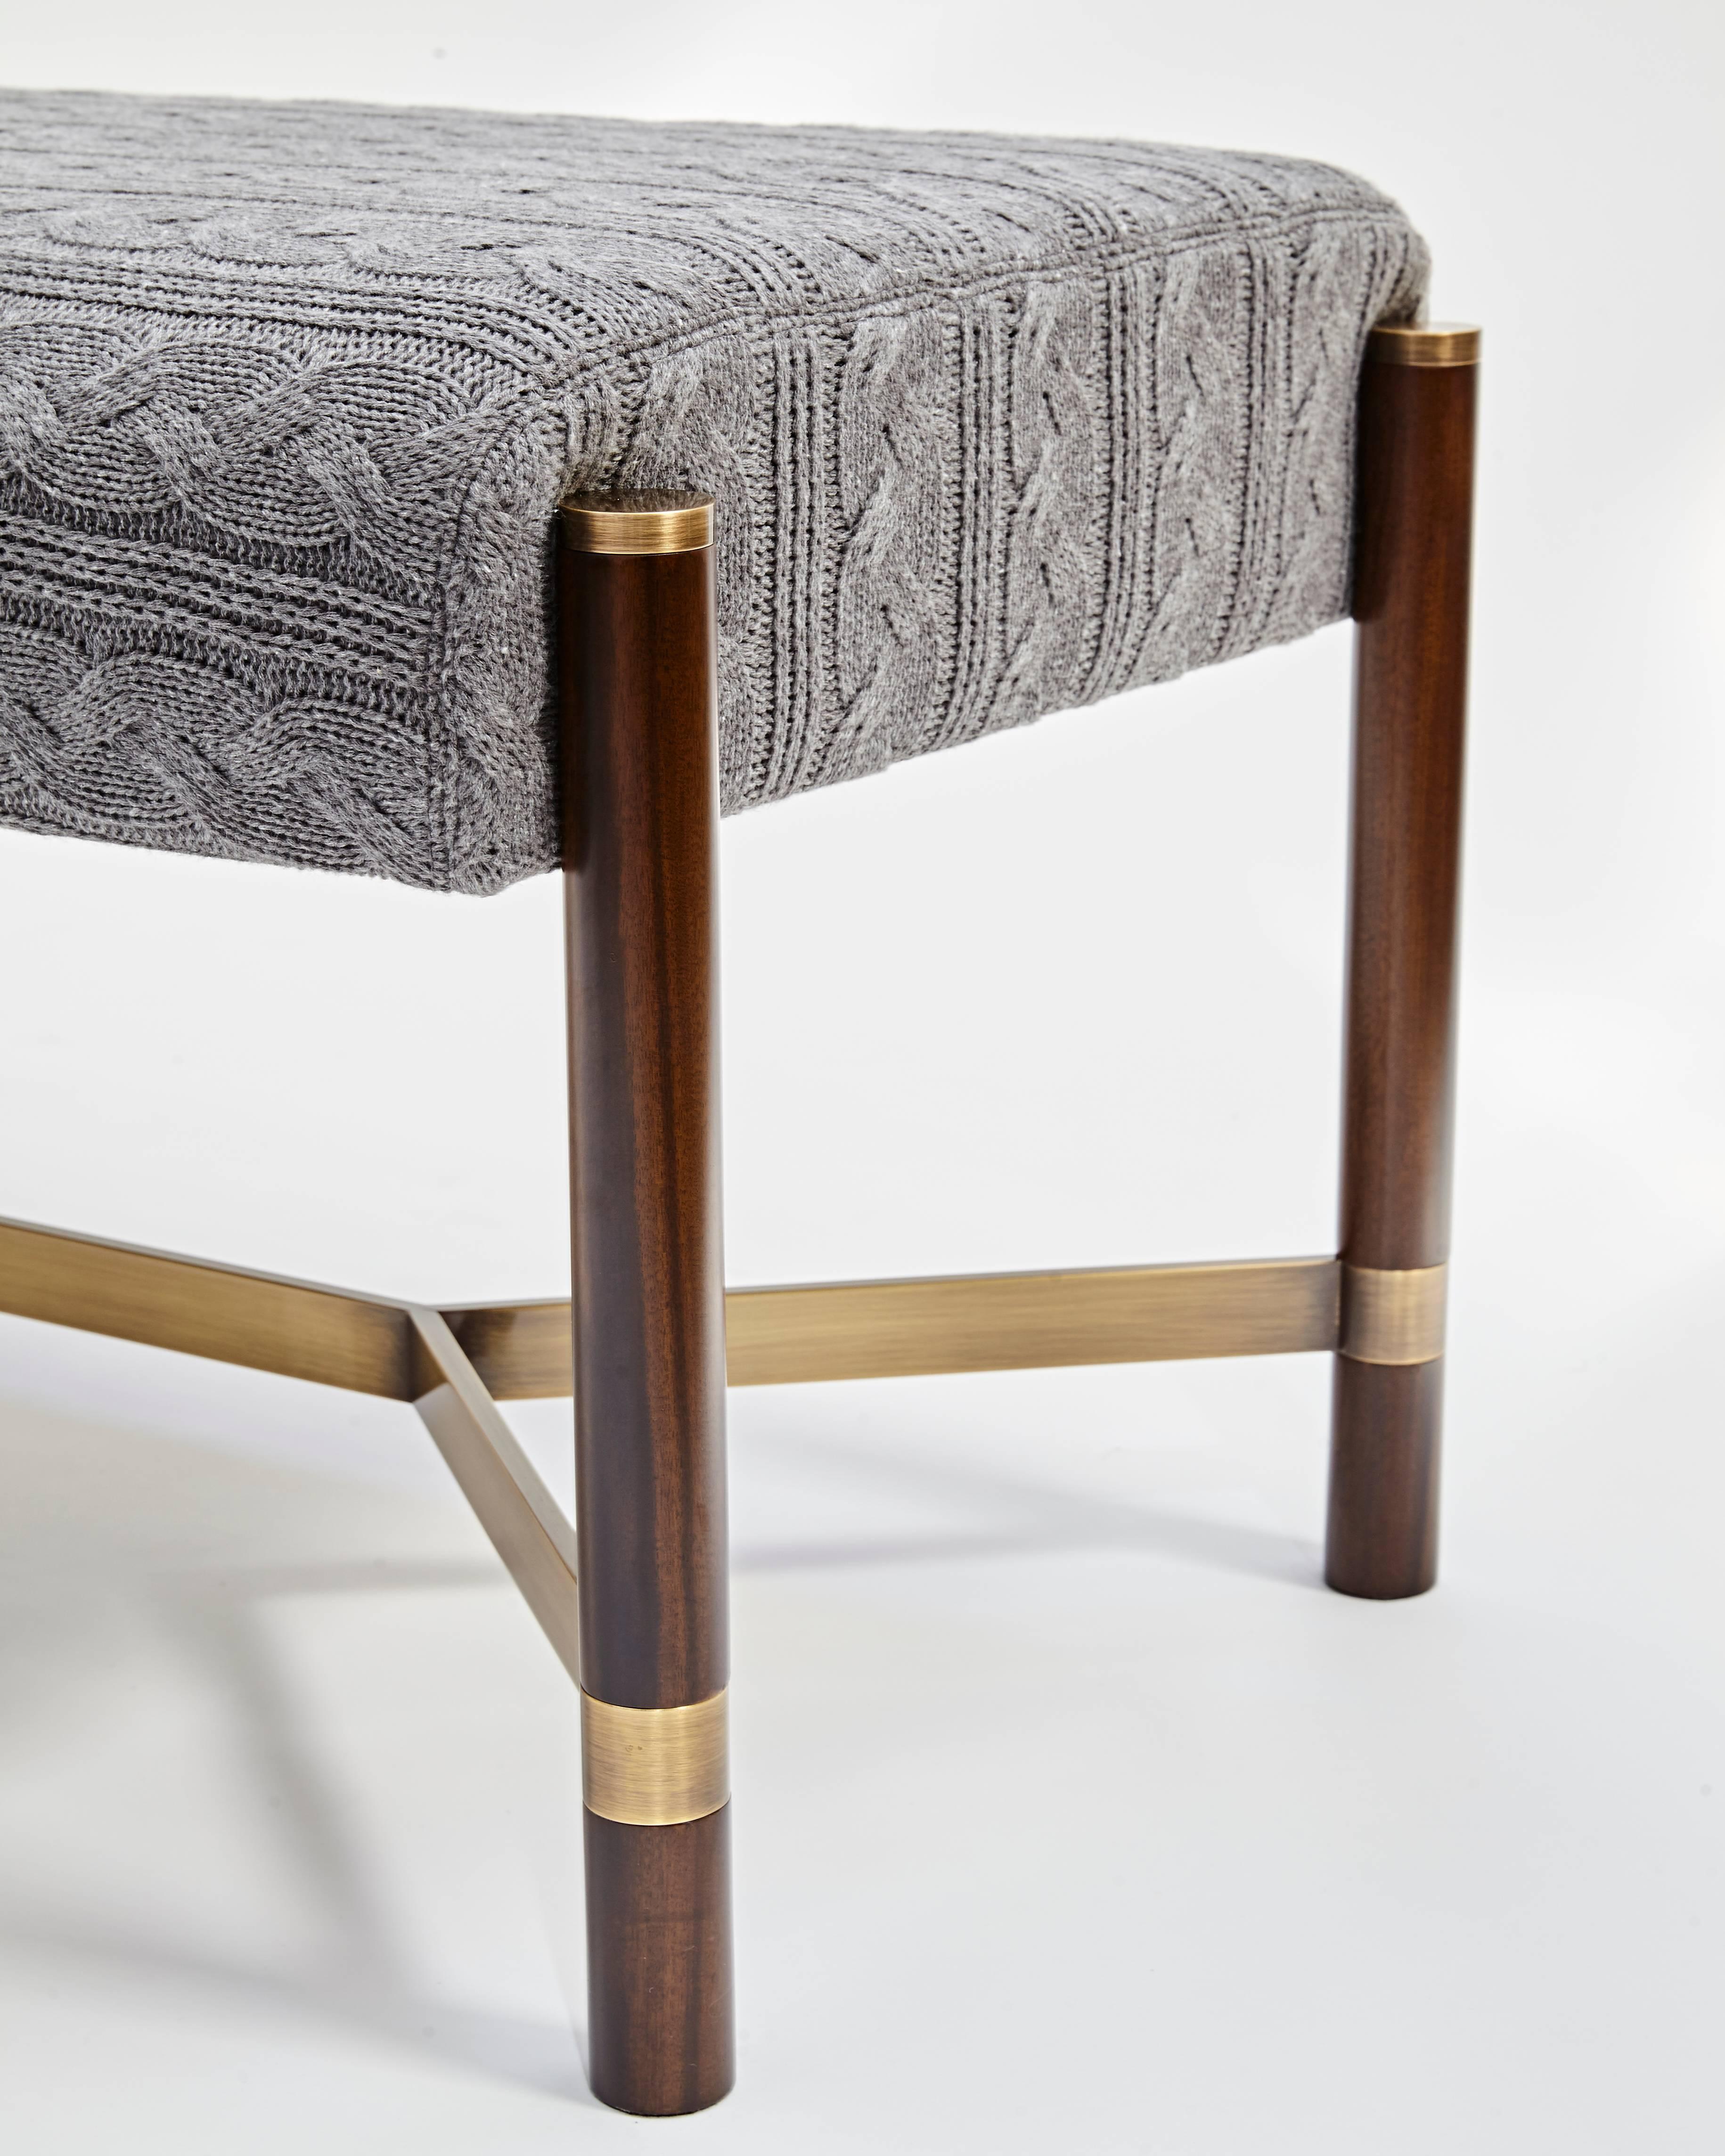 This bench is made of Brazilian imbuia wood with brass details, it draws inspiration from the 1970s design and a very elegant combination of wood and brass. The legs are in solid wood and the details in stainless steel brass like finishing.

Seat